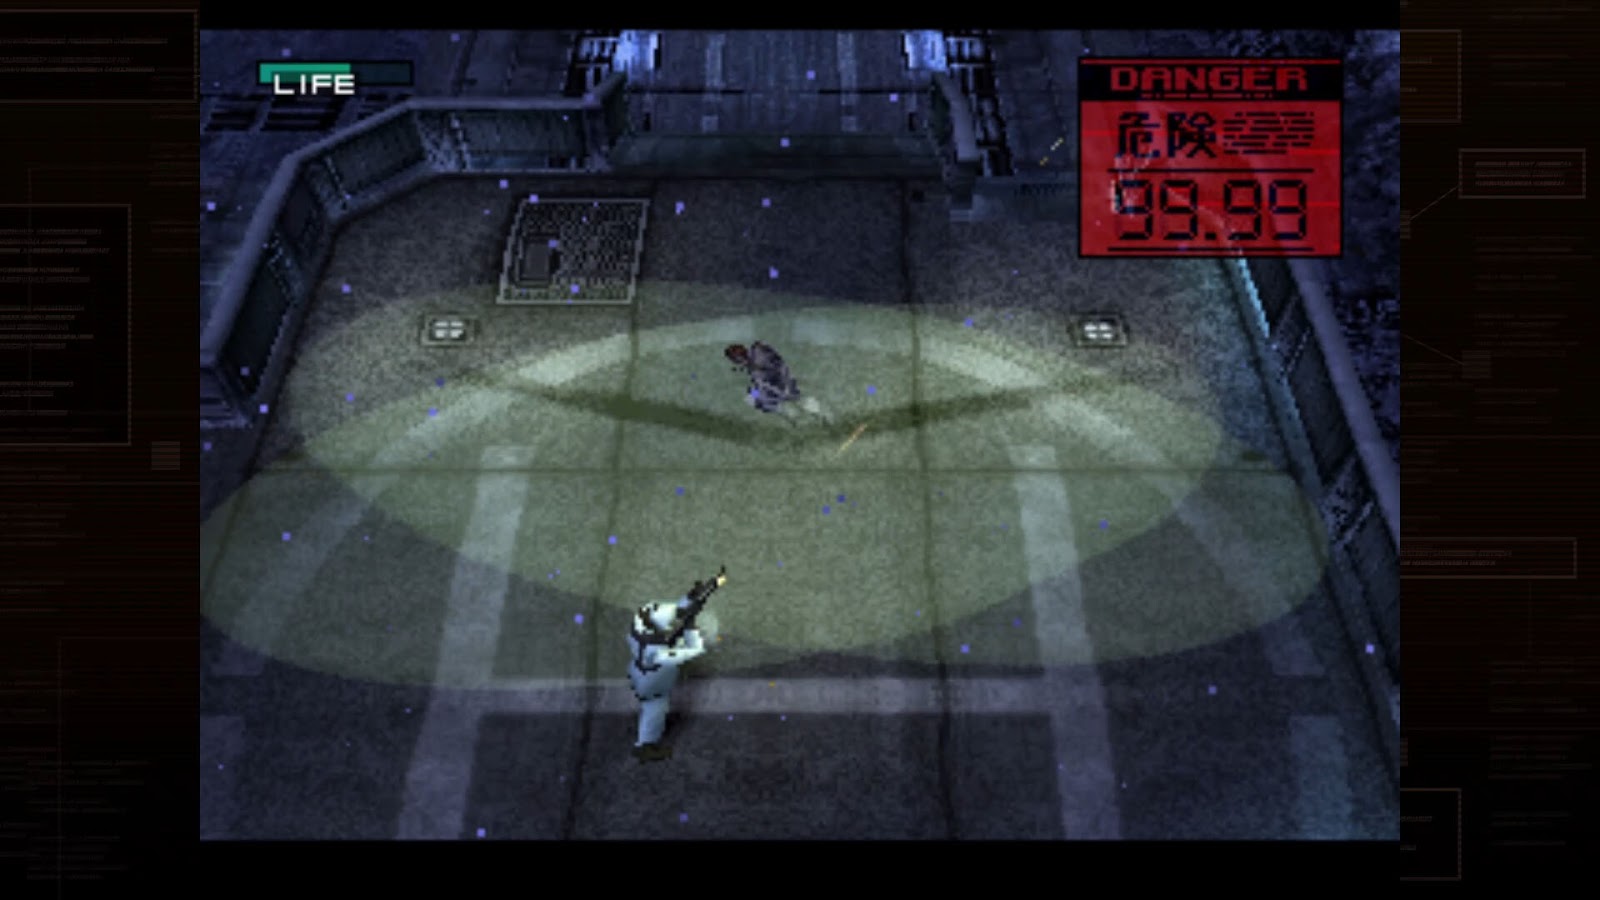 metal-gear-solid-master-collection-vol1-pc-screenshot-2